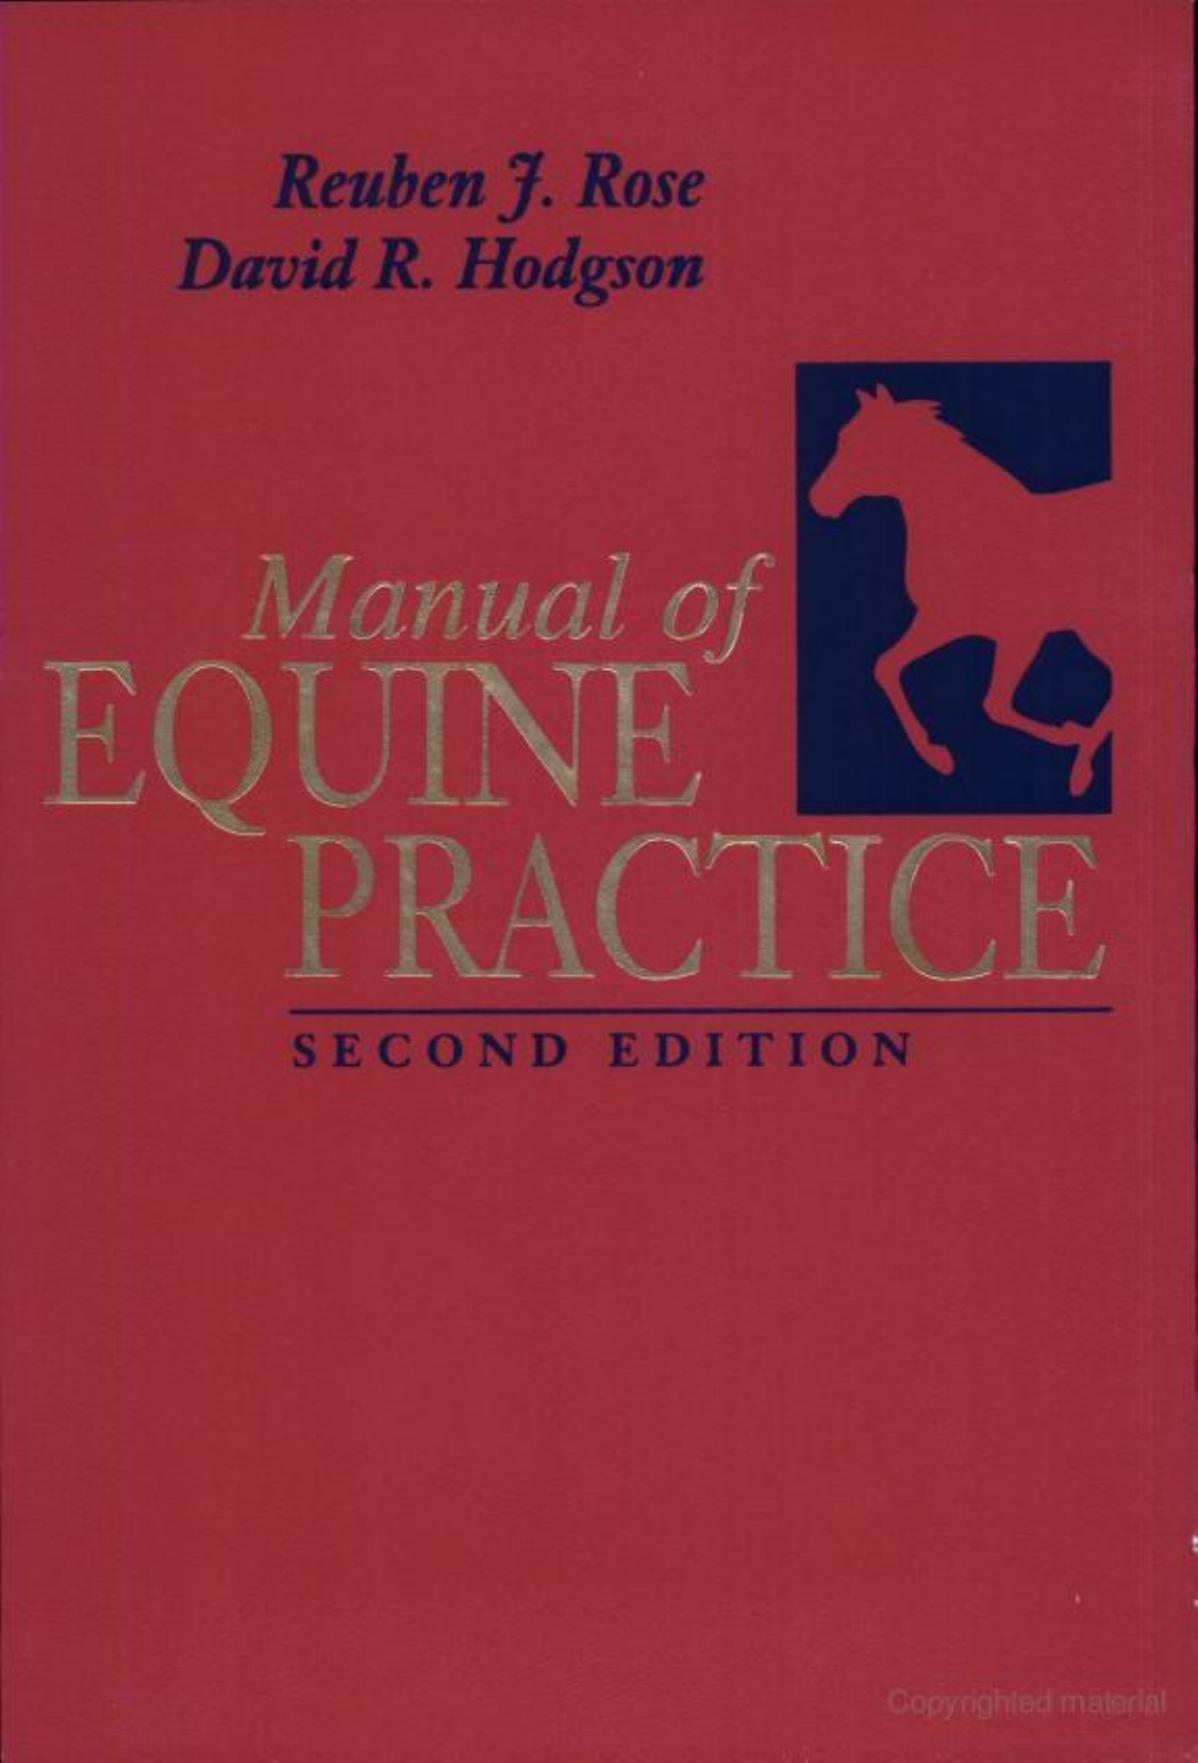 Manual of equine practice